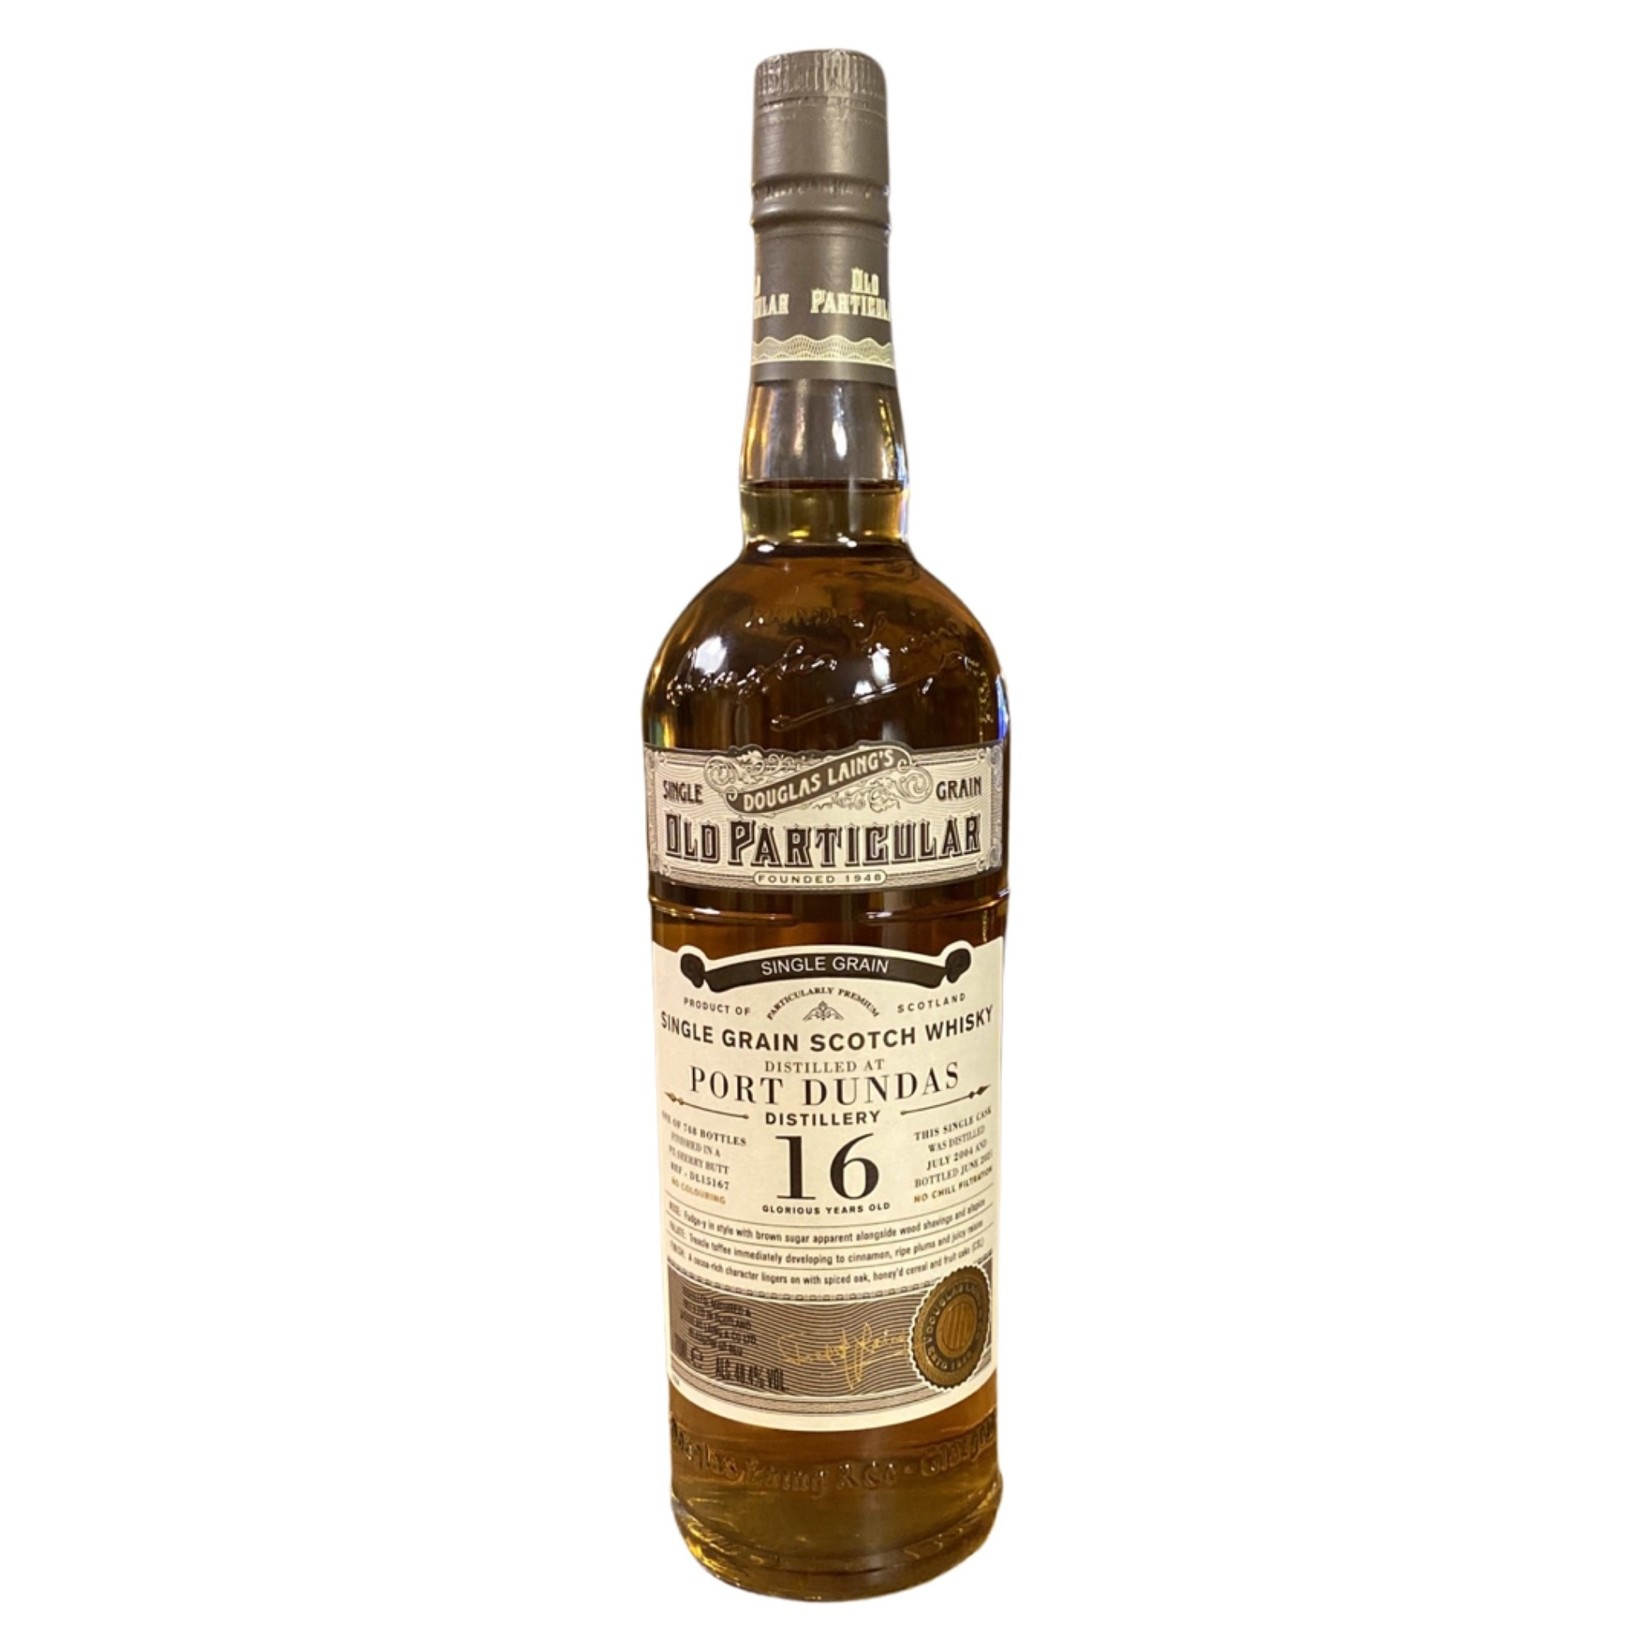 Old Particular Port Dundas 16 years  px 0,7 ltr